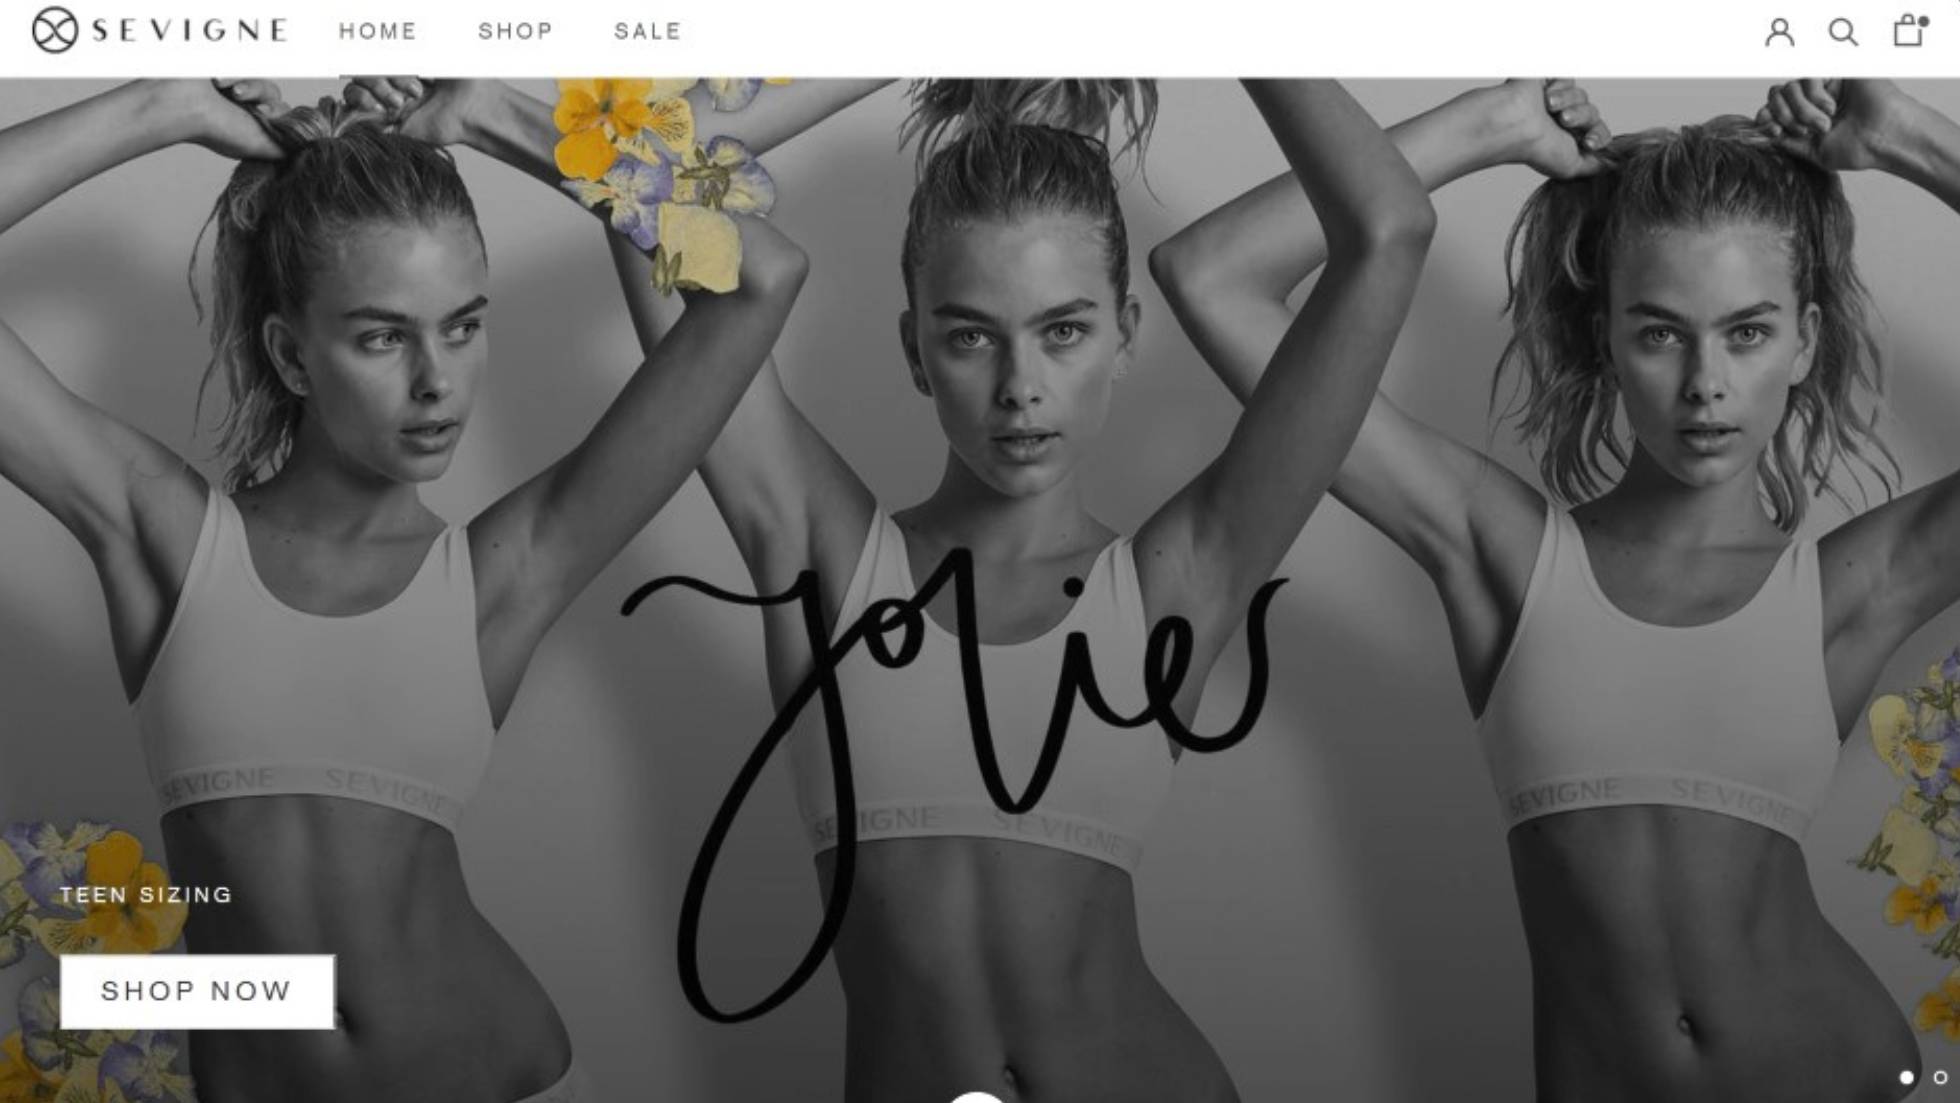 A Photo of the Creato's Ecommerce web design case study of Sevigne a clothing brand in Sydeny, with three women posing in a black and white photo wearing a white tank top and the word ‘Jolie’ on them, and a ‘Shop Now’ button for teen sizing. 